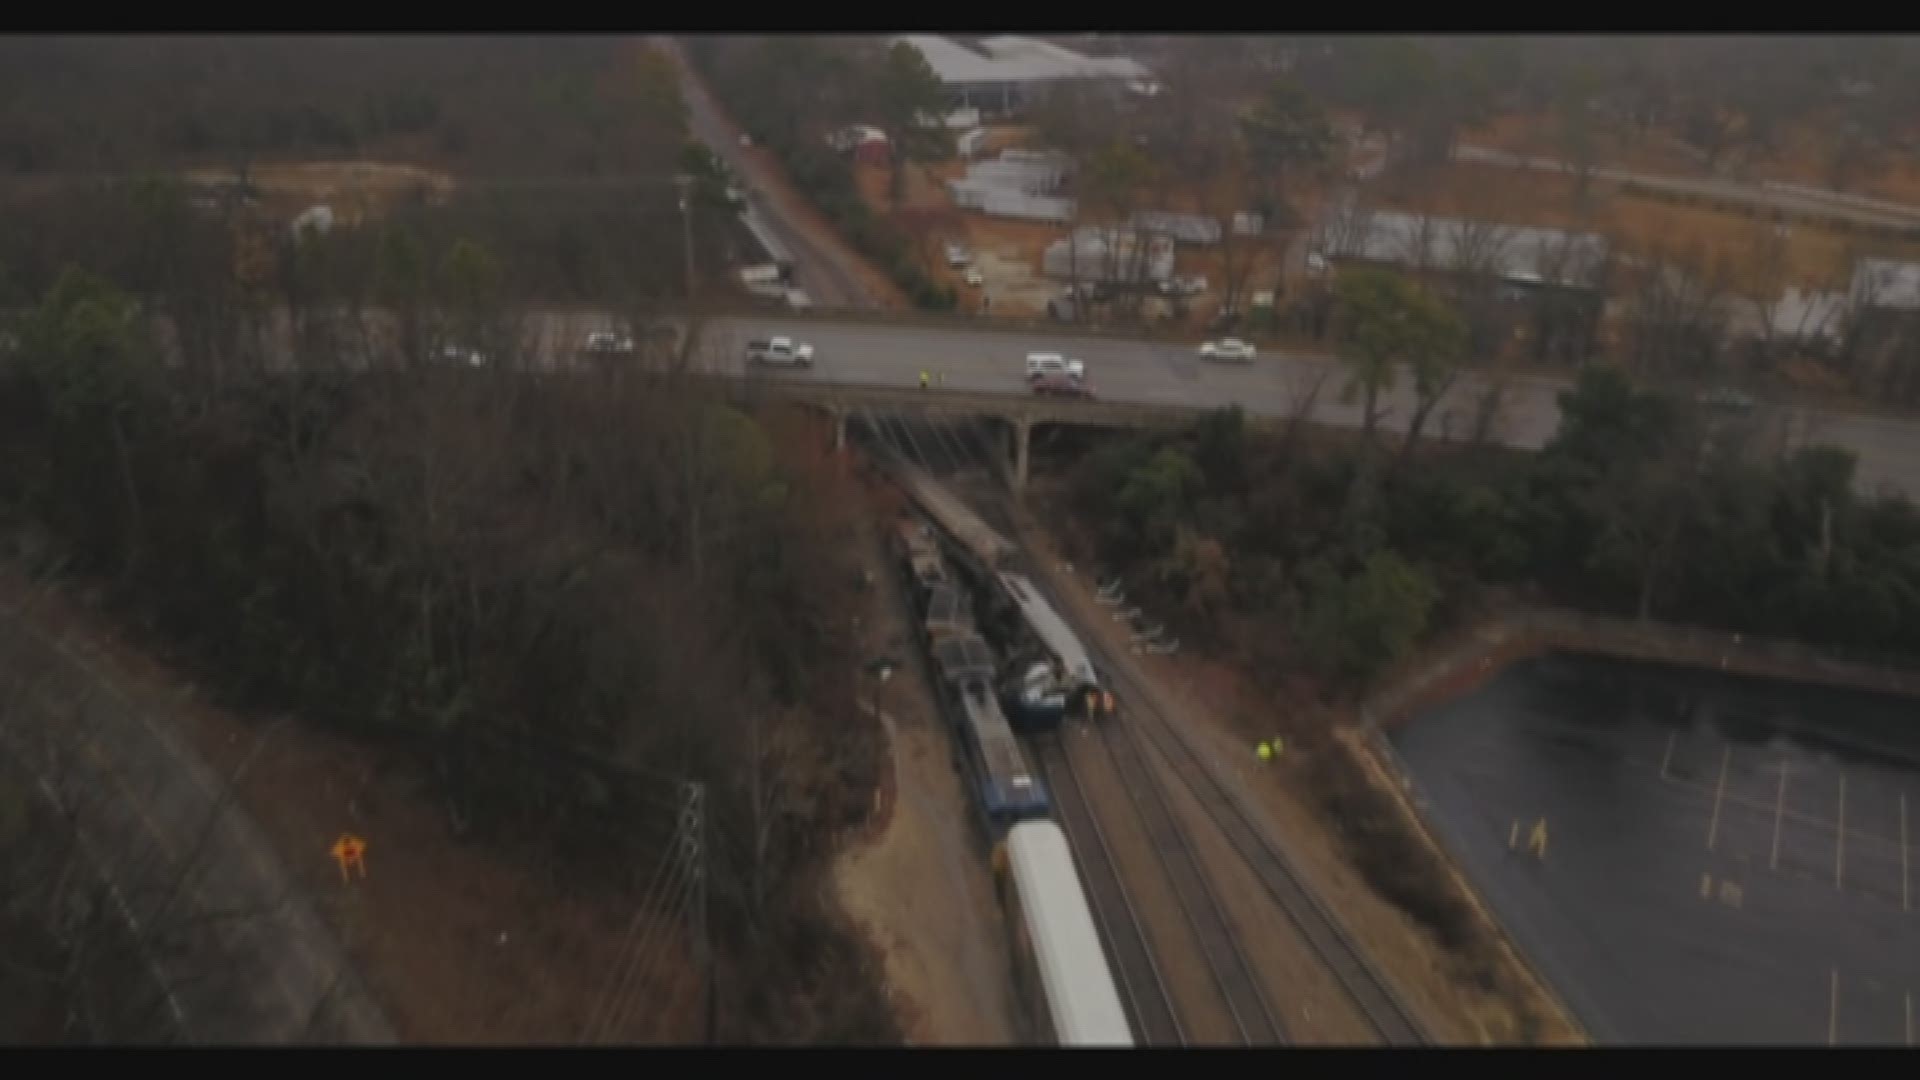 The Amtrak train collided with a freight train on Sunday, February 4, 2018.